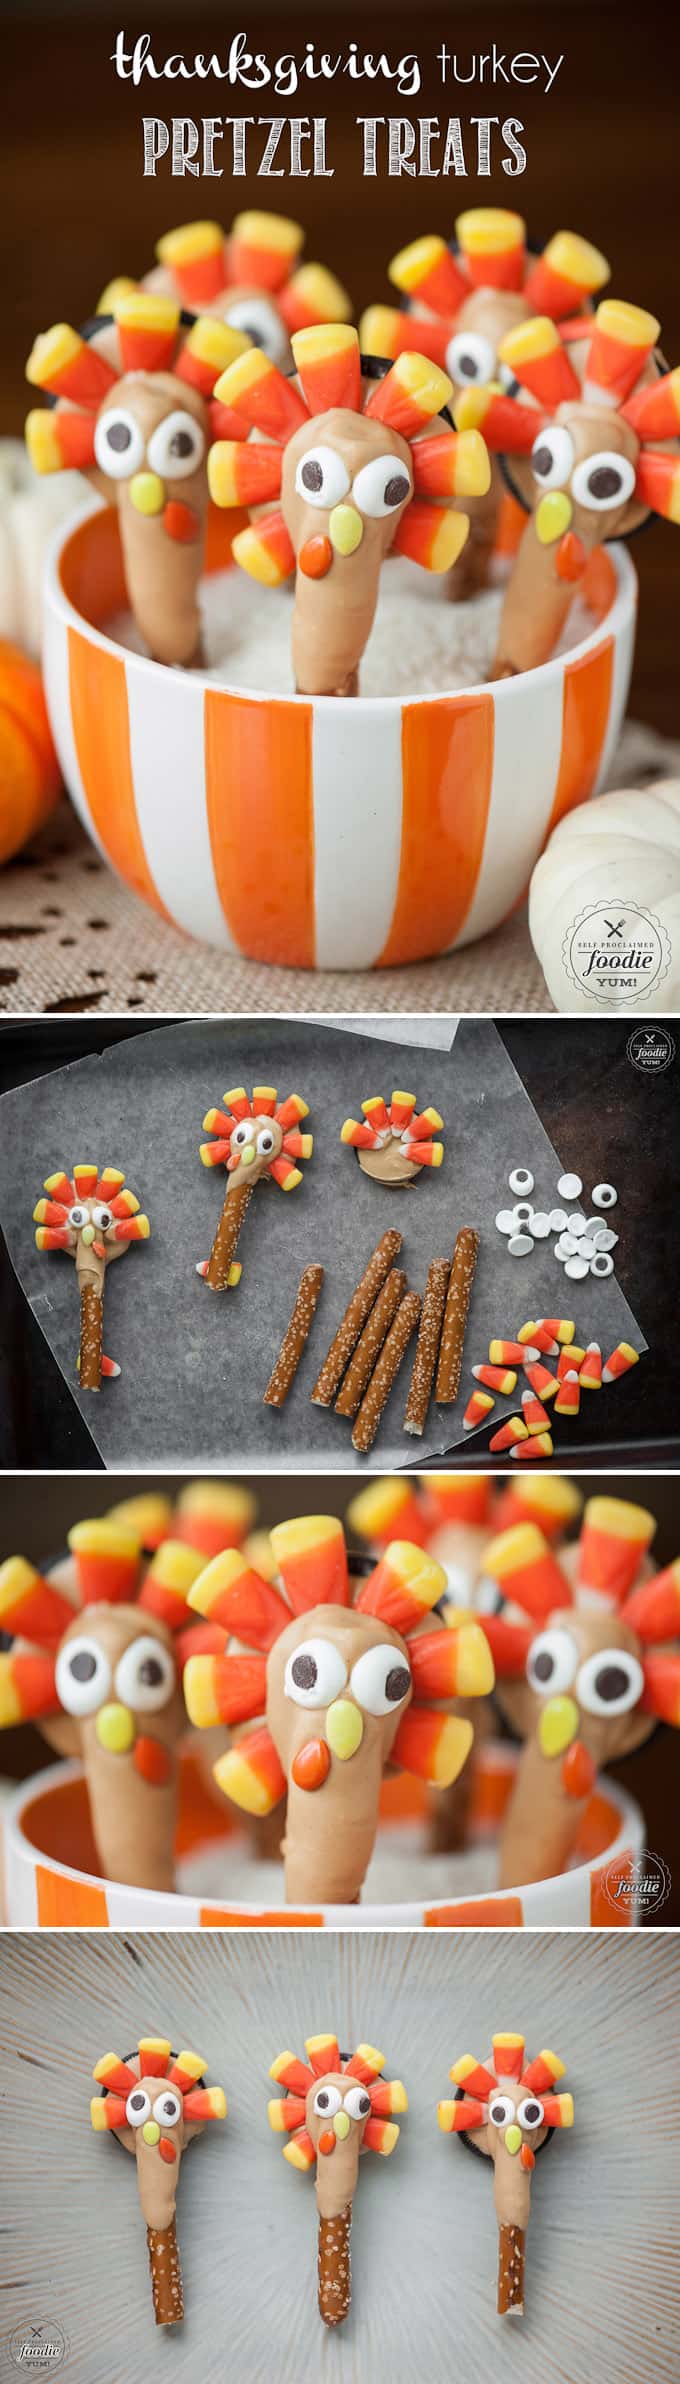 These Thanksgiving Turkey Pretzel Treats are super fun and easy to make. The kids will absolutely love them and they actually taste really good too!